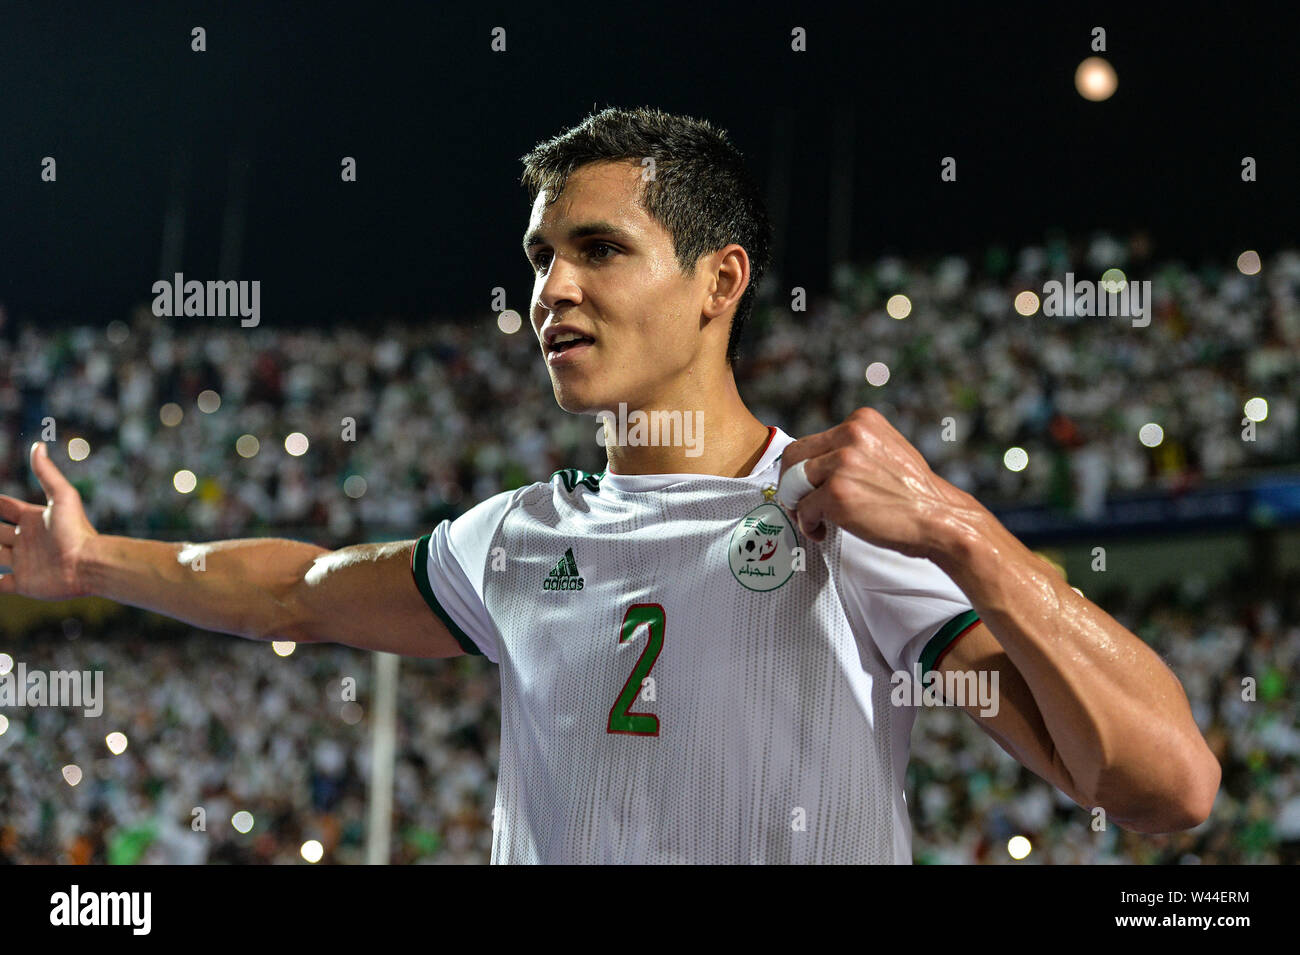 Cairo. 19th July, 2019. Aissa Mandi of Algeria celebrates the victory after the 2019 Africa Cup of Nations final match between Senegal and Algeria in Cairo, Egypt on July 19, 2019. Algeria won 1-0 and claimed the title. Credit: Li Yan/Xinhua/Alamy Live News Stock Photo